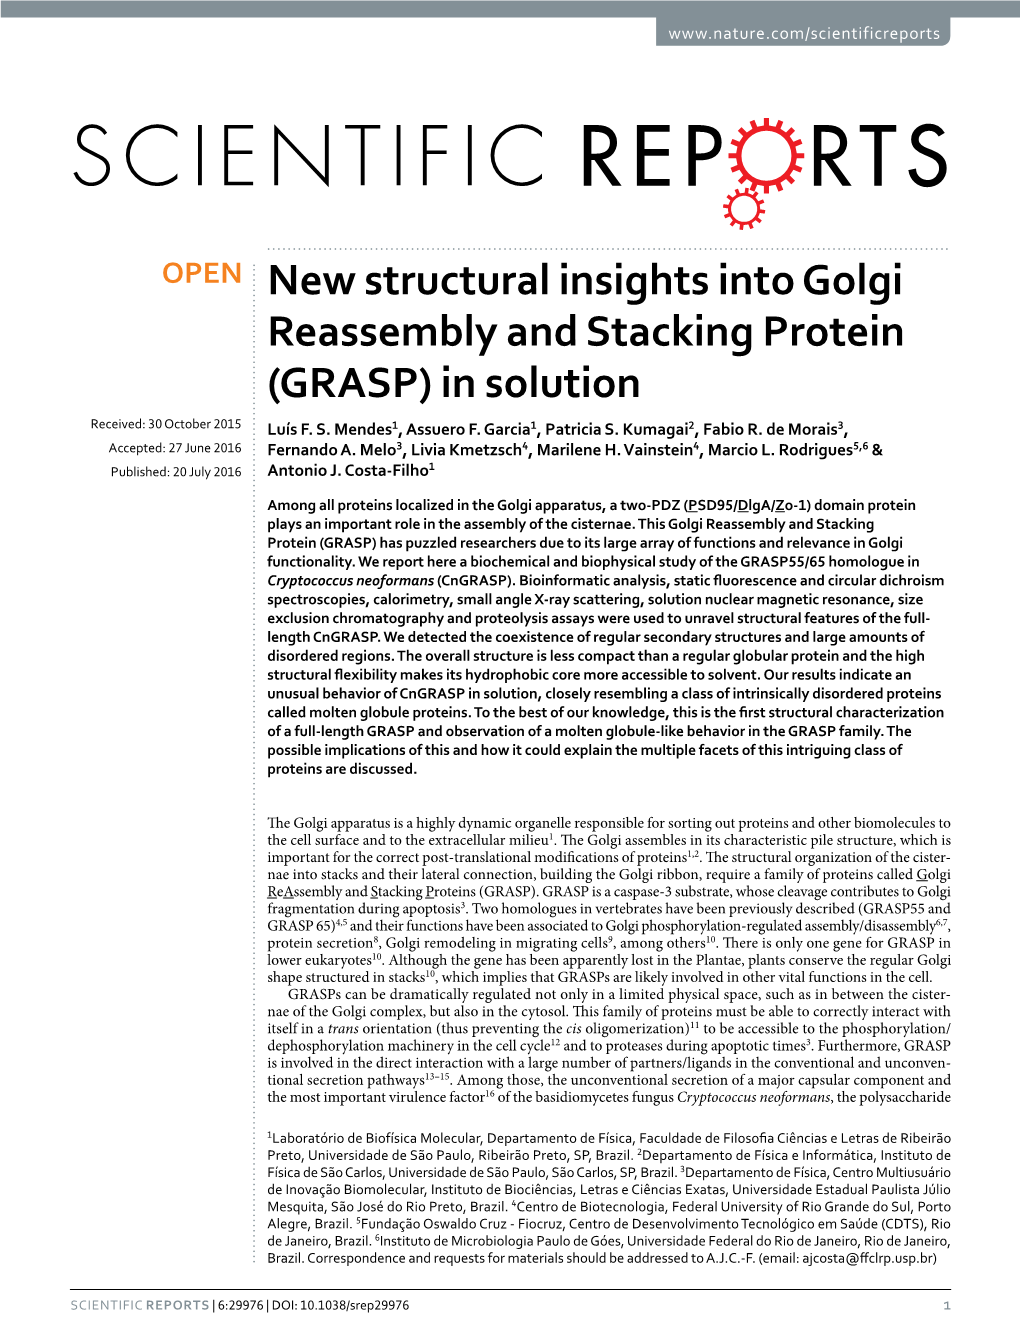 New Structural Insights Into Golgi Reassembly and Stacking Protein (GRASP) in Solution Received: 30 October 2015 Luís F